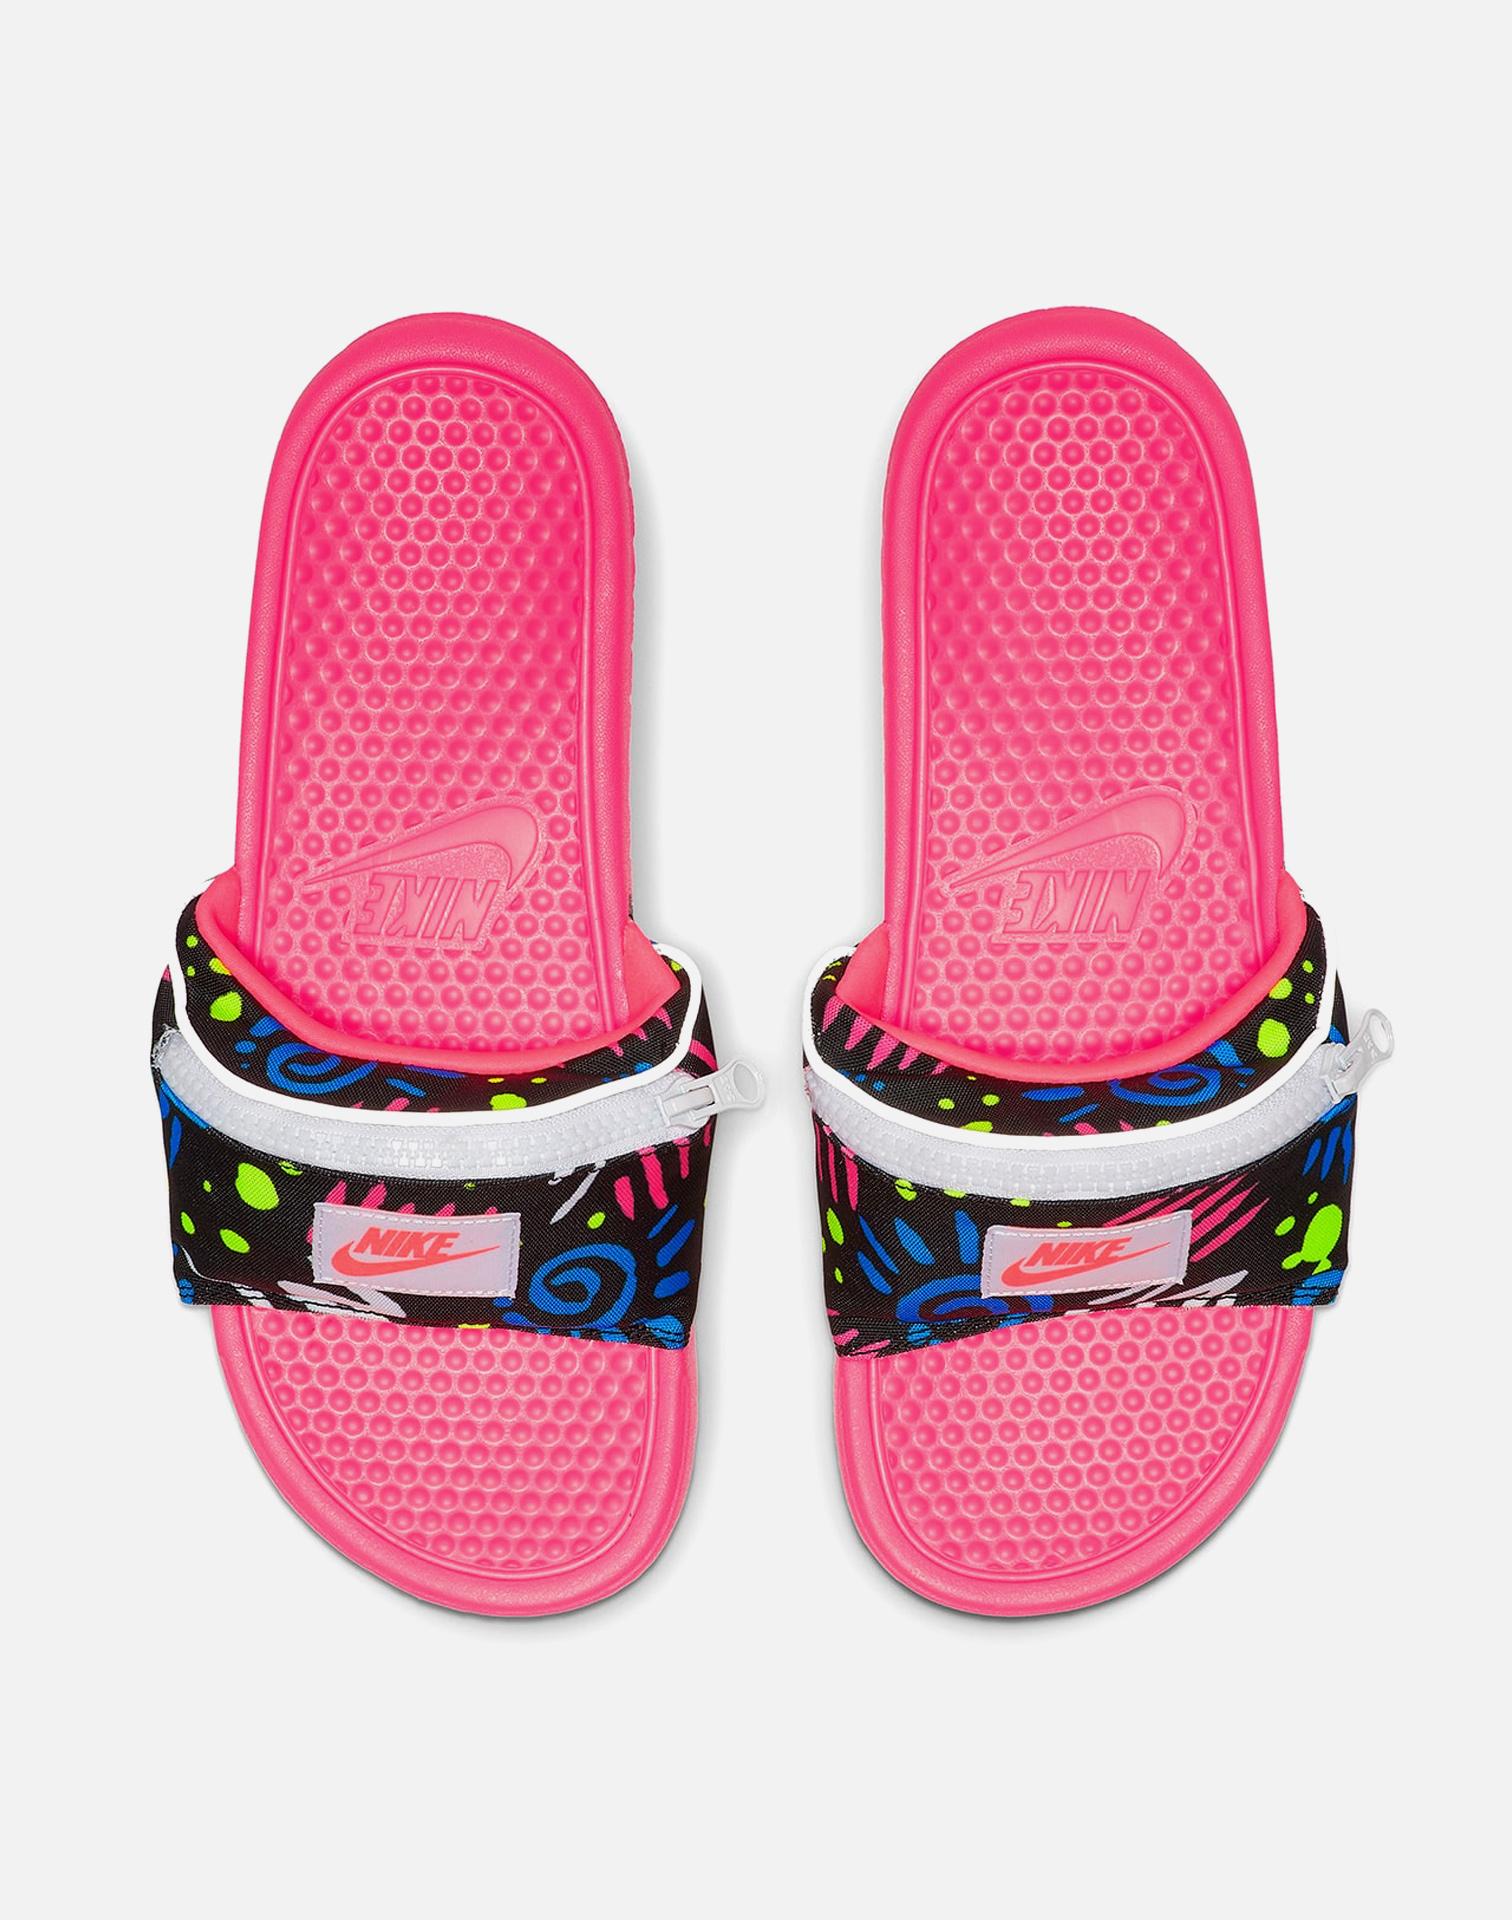 nike sliders with fanny pack